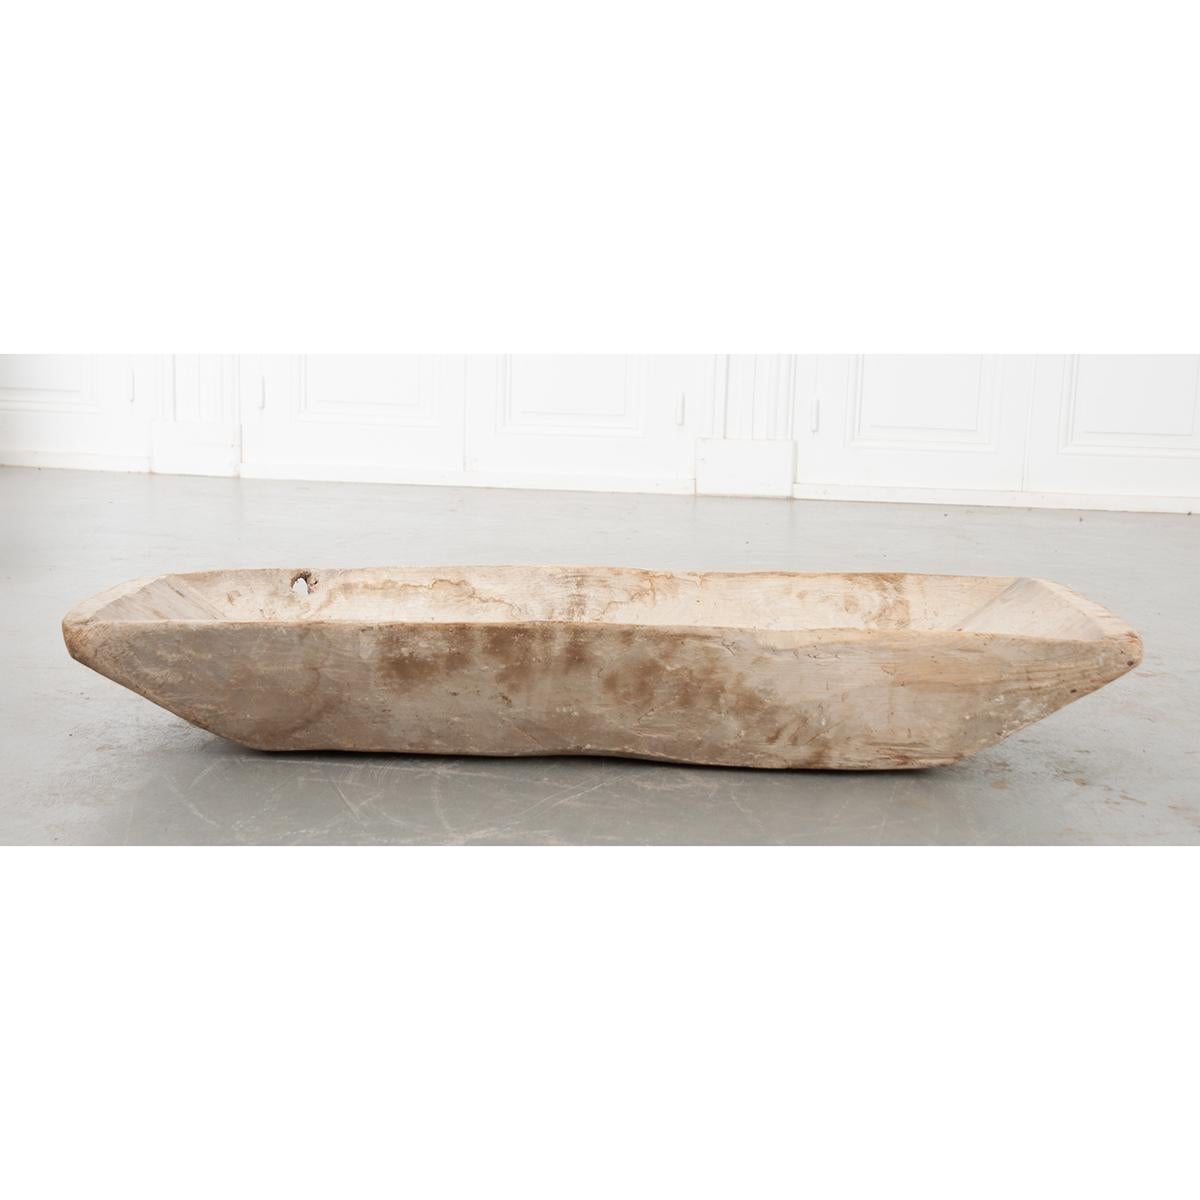 This is a French dough bowl, a wooden vessel used to mix bread dough. These bowls were found in every home and were typically carved from a large piece of wood. Now, it would make a nice conversation piece or decorate a dining room table. Circa 1880.